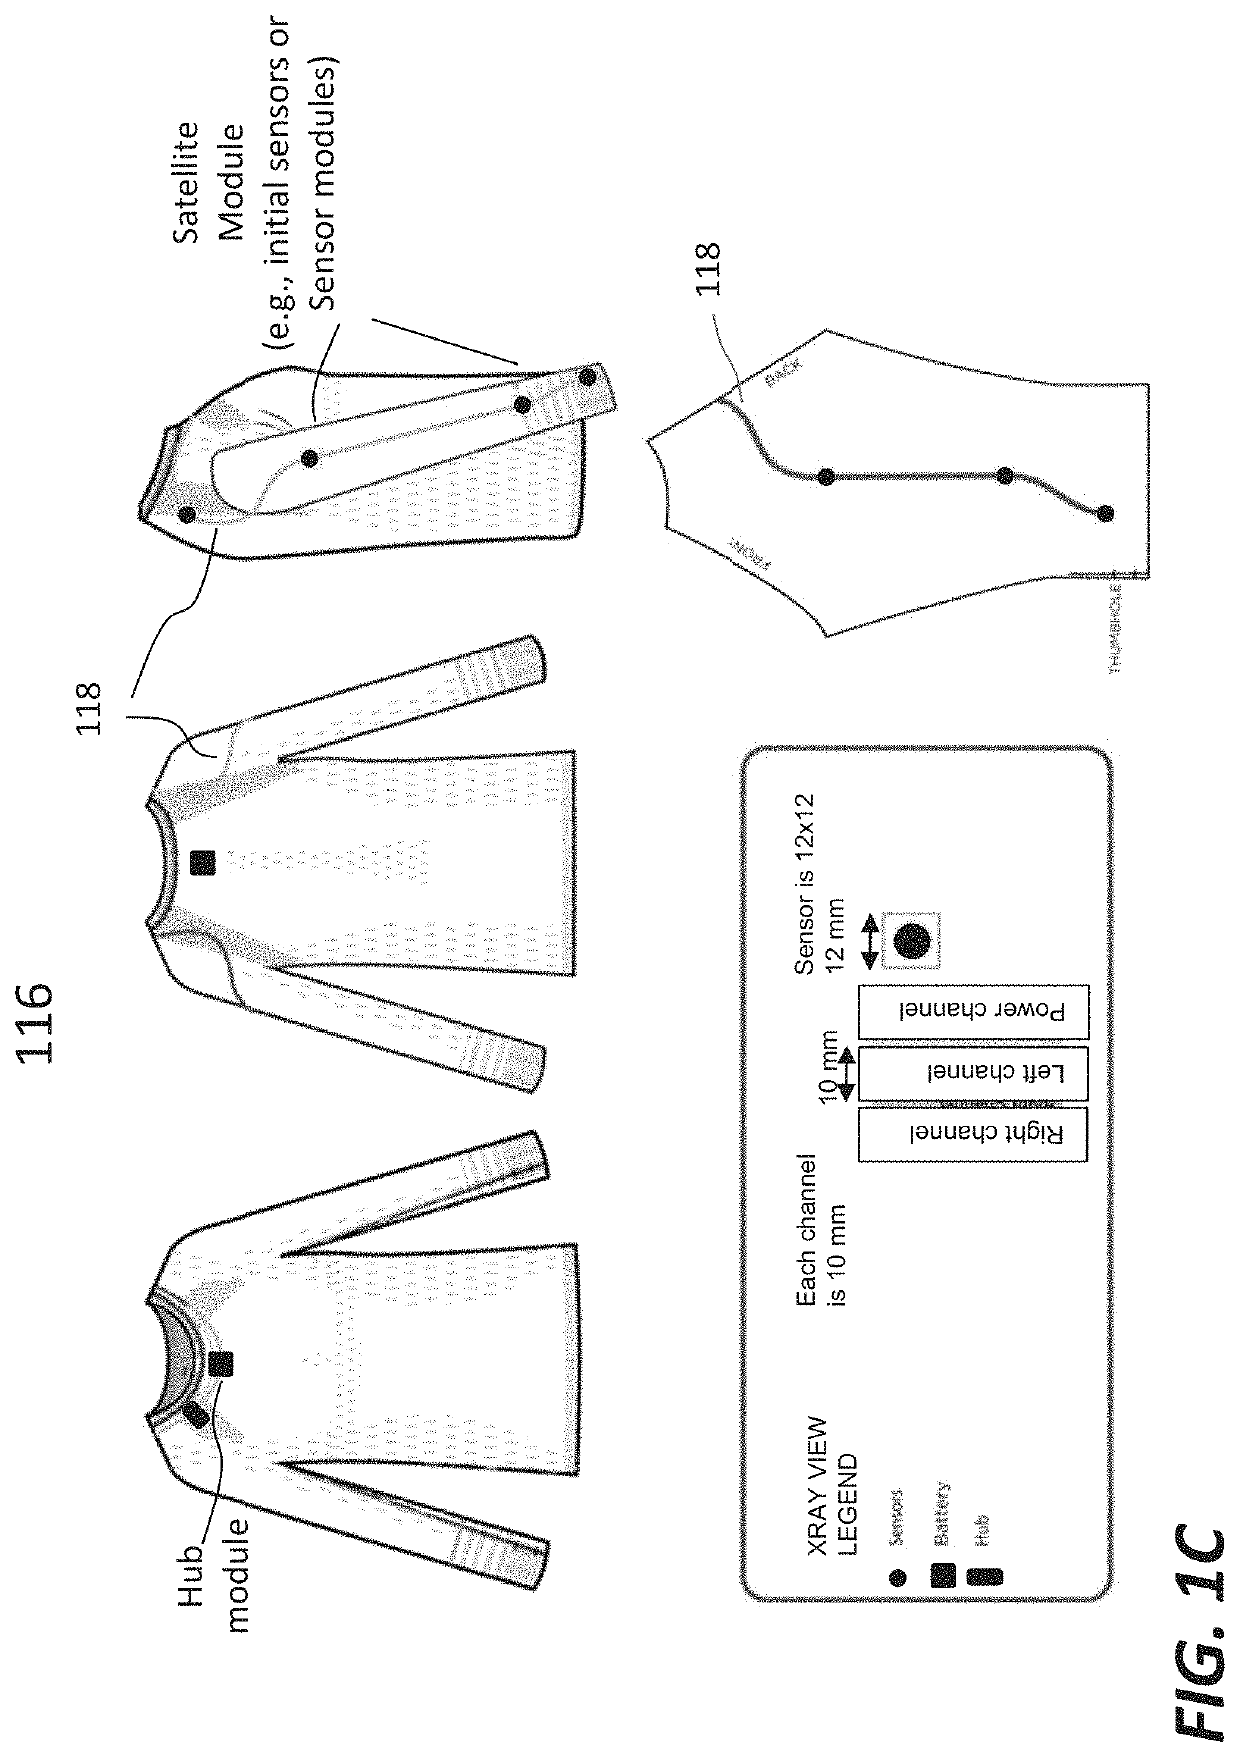 Motion management via conductive threads embedded in clothing material